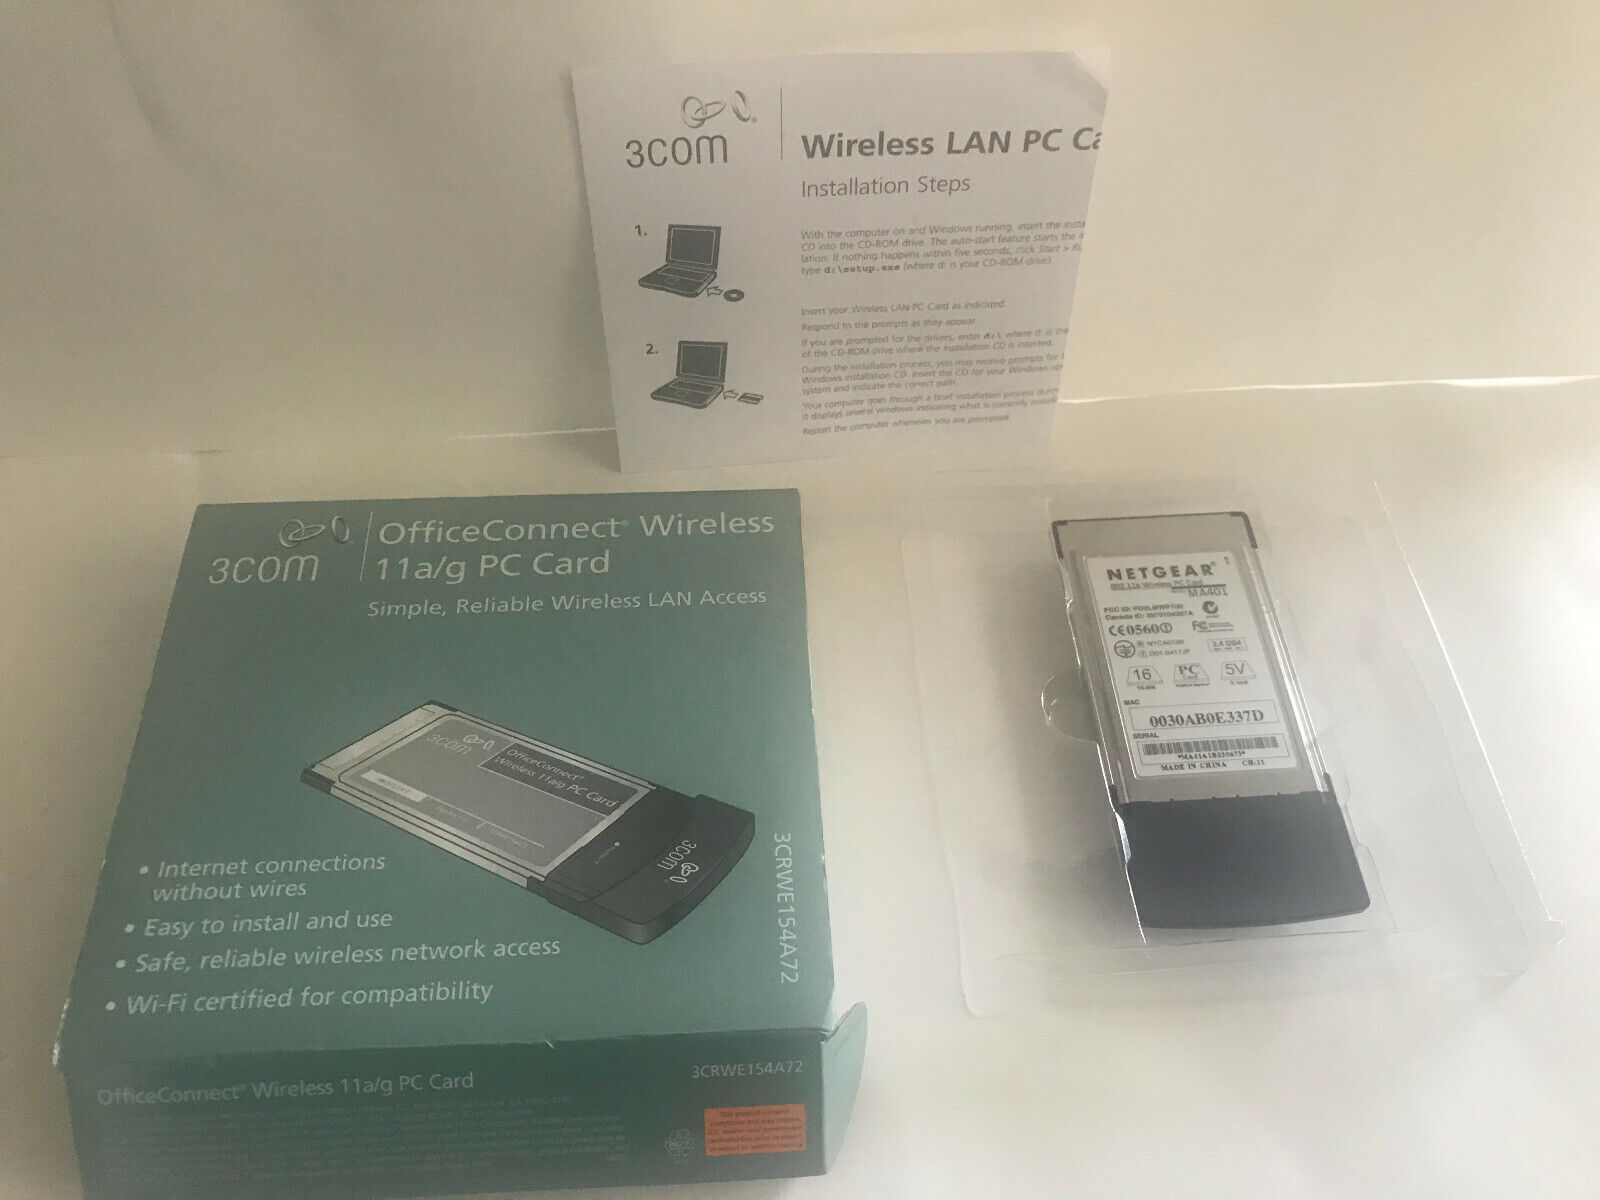 3com corp officeconnect wireless(3CRWE154A72)